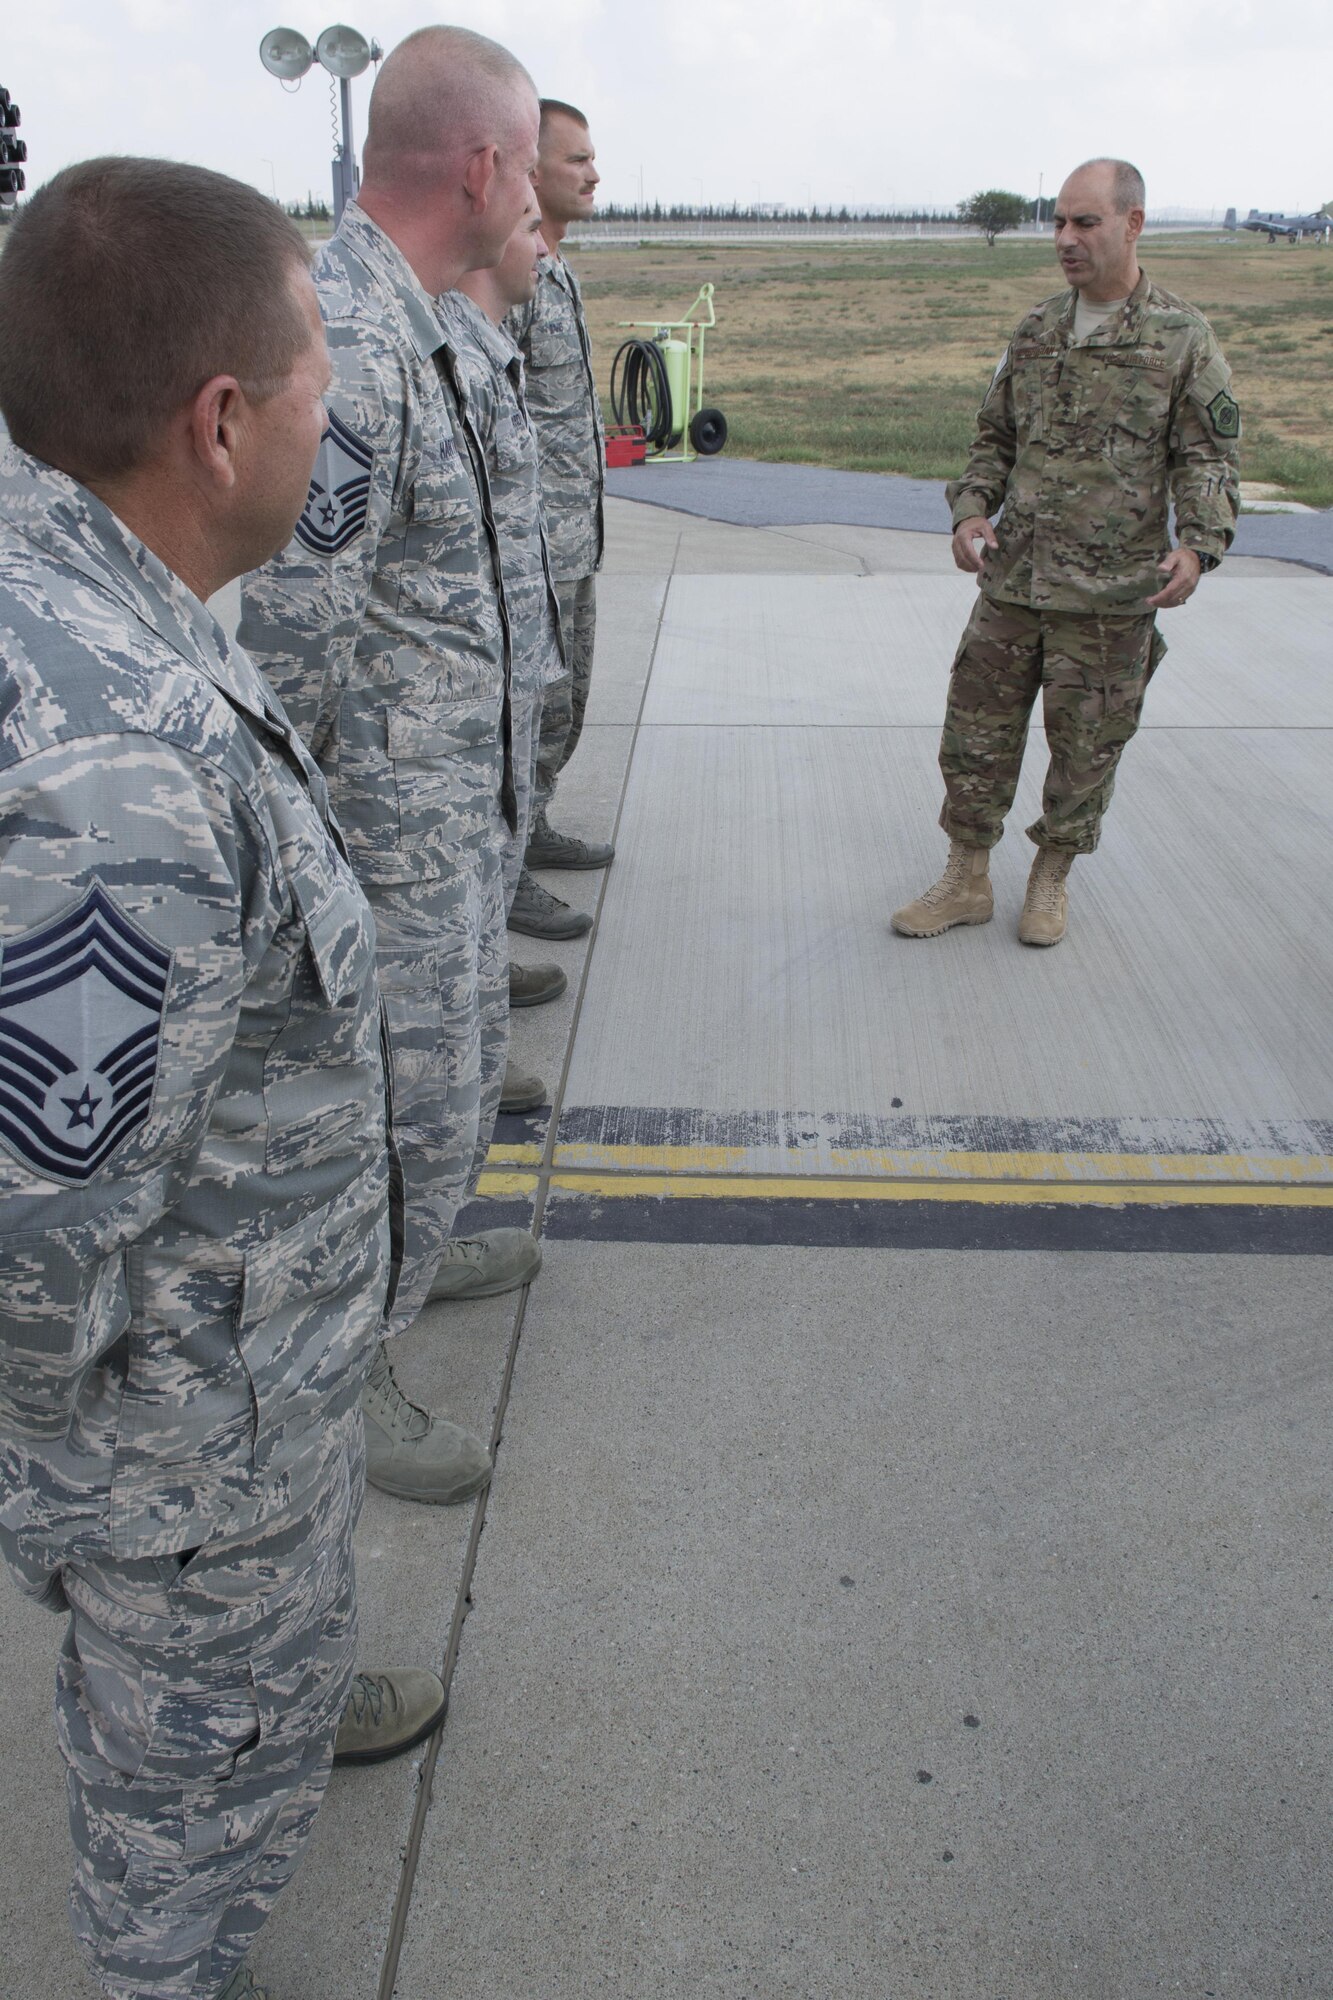 U.S. Air Force Lt. Gen. Jeffrey Harrigian, U.S. Air Forces Central Command commander, speaks with Airmen from the 124th Aircraft Maintenance Squadron at Incirlik Air Base, Turkey, Aug. 28, 2016. The Airmen are deployed here from Gowen Field, Idaho. During Harrigian’s visit, he was given an opportunity to learn more about the unique capabilities each service provides to Operation Inherent Resolve missions. (U.S. Air Force photo by Staff Sgt. Ciara Gosier)